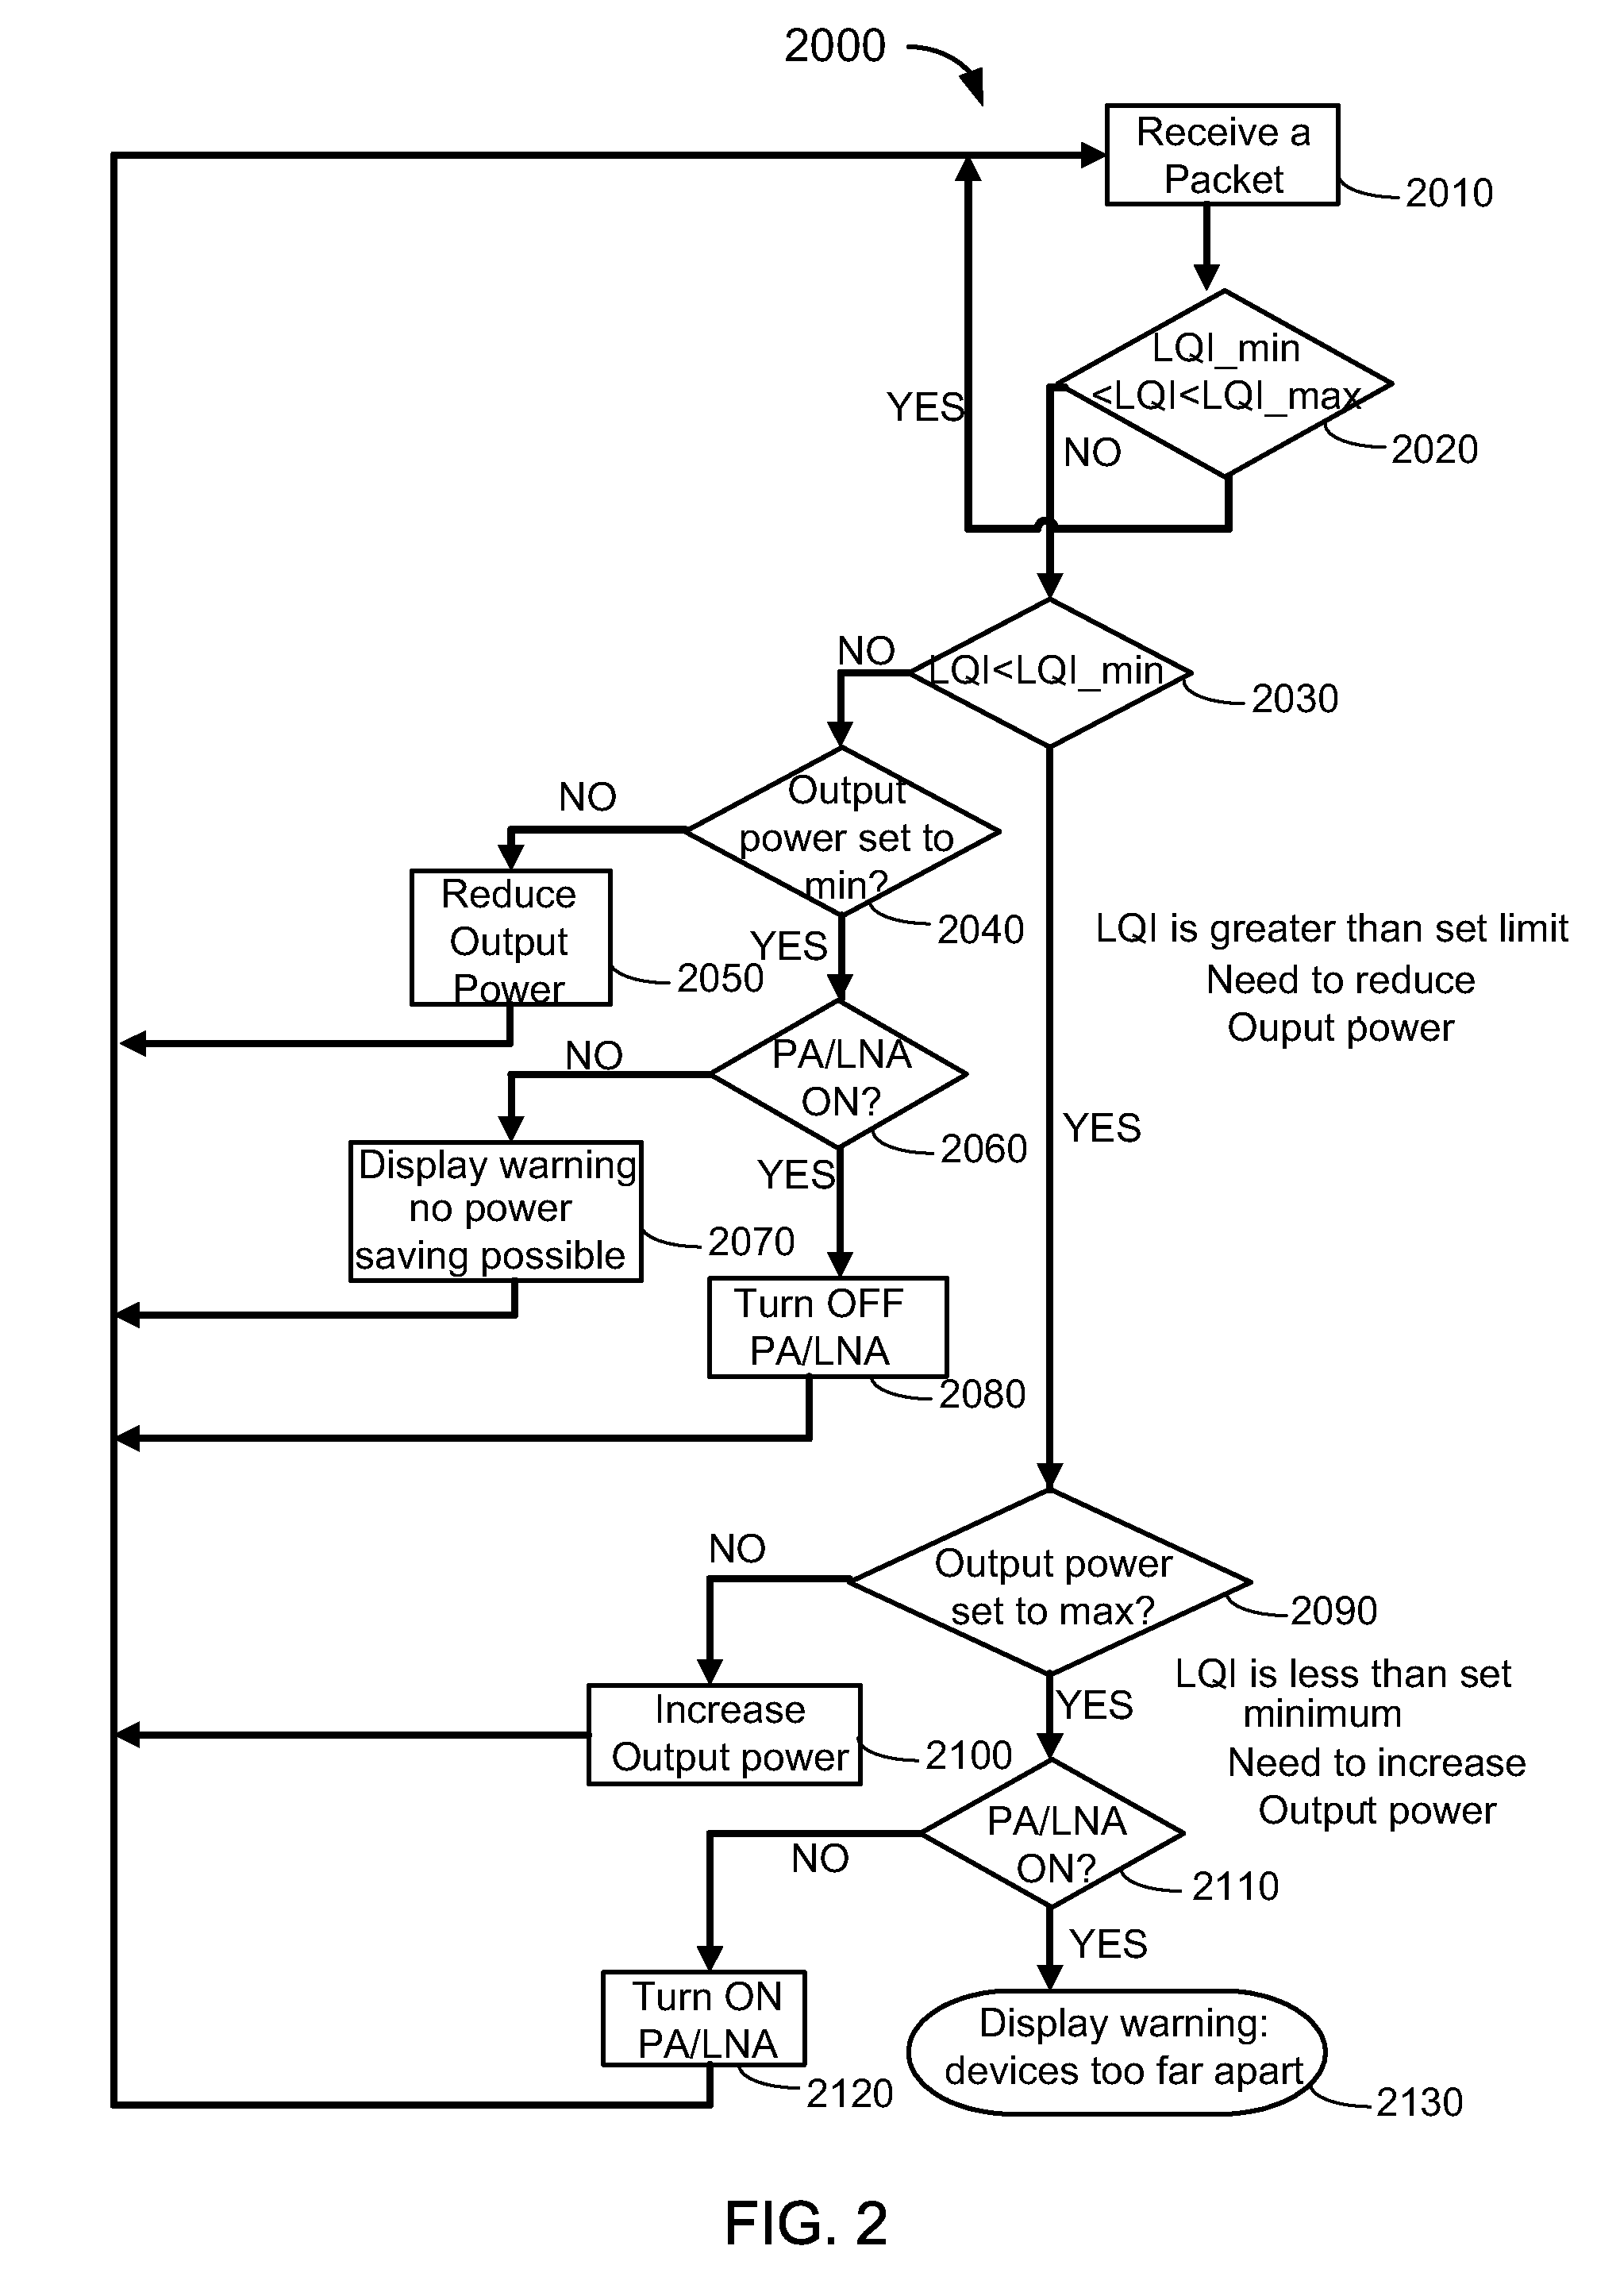 Automated power control to optimize power consumption and improved wireless connection